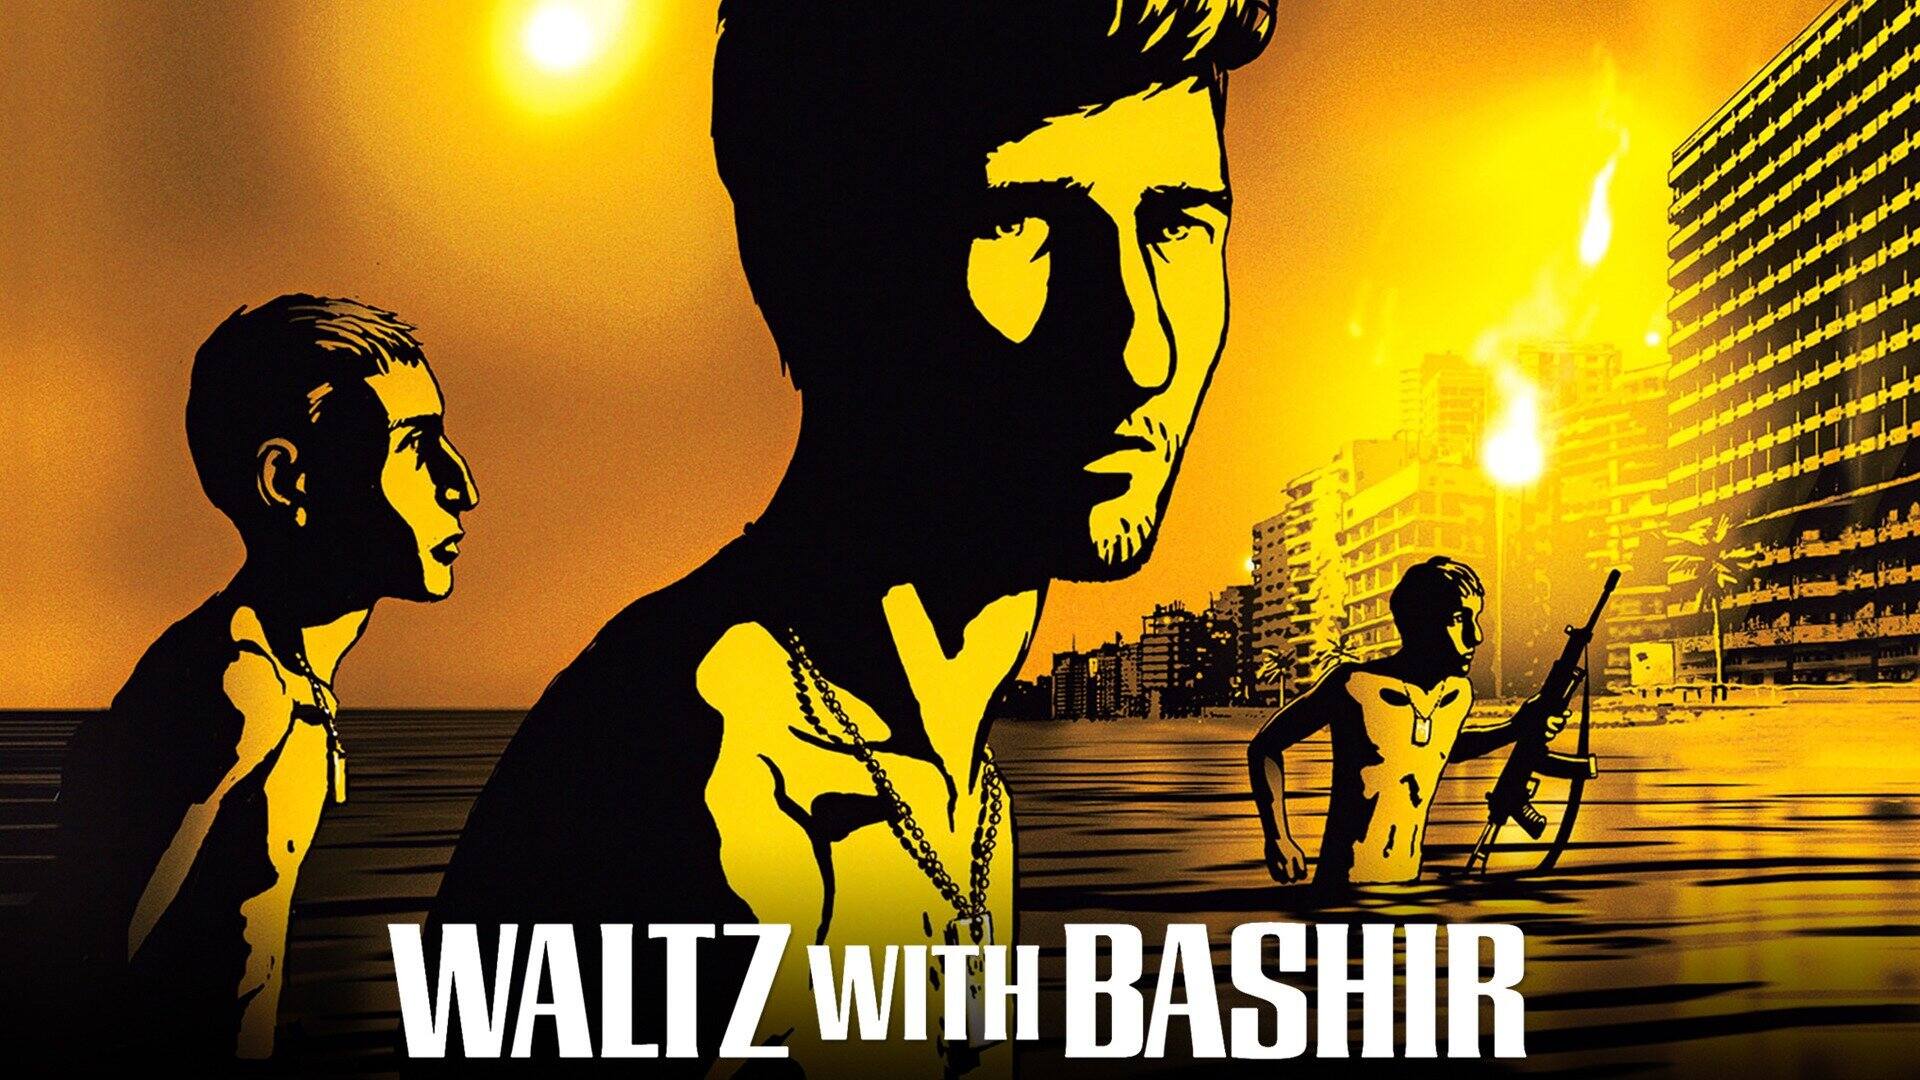 44-facts-about-the-movie-waltz-with-bashir